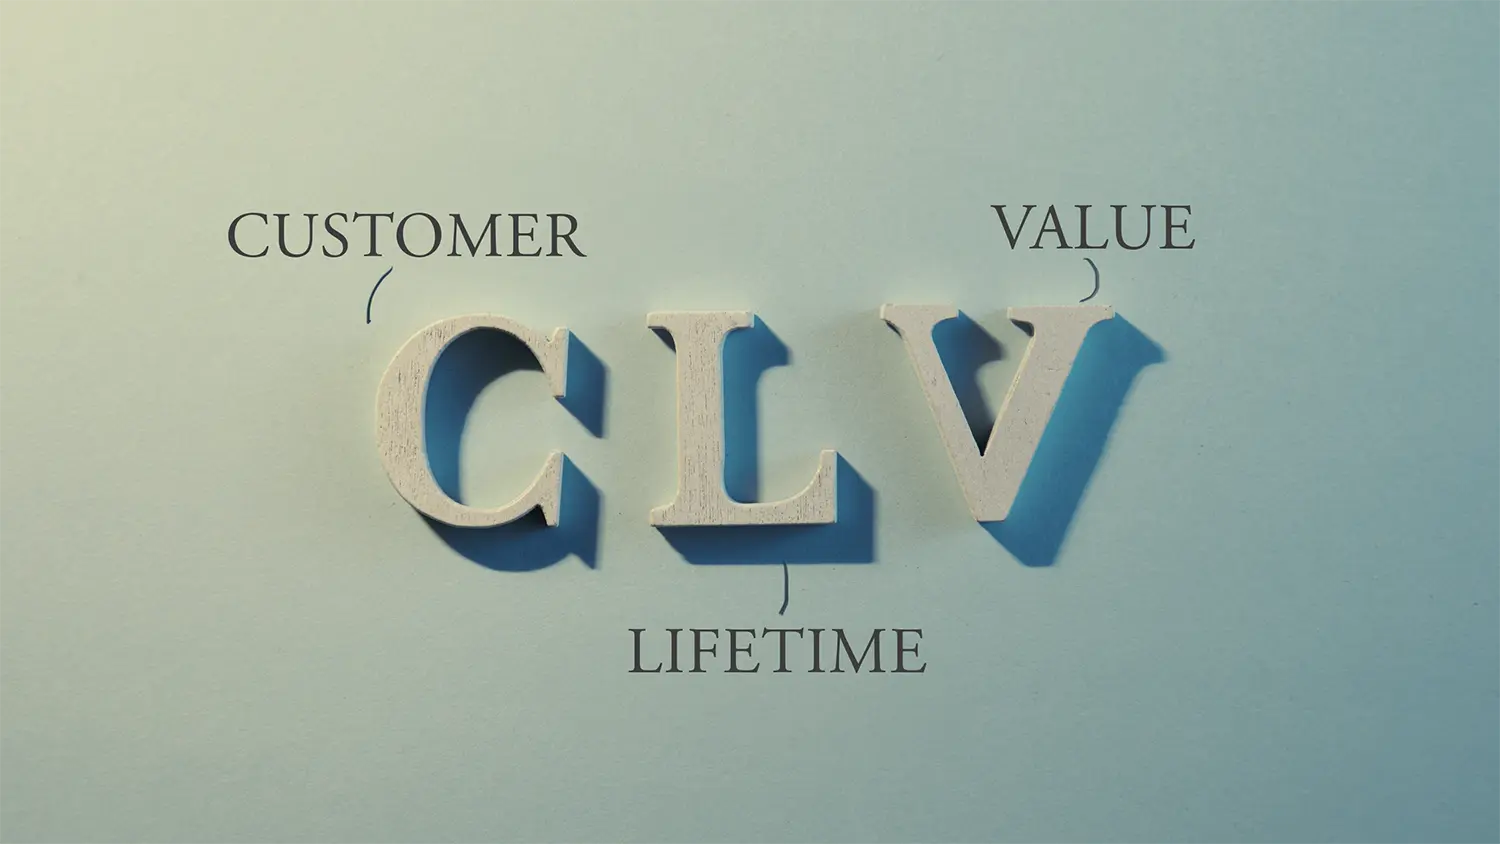 Image of the Letters CLV and the Words Customer Lifetime Value